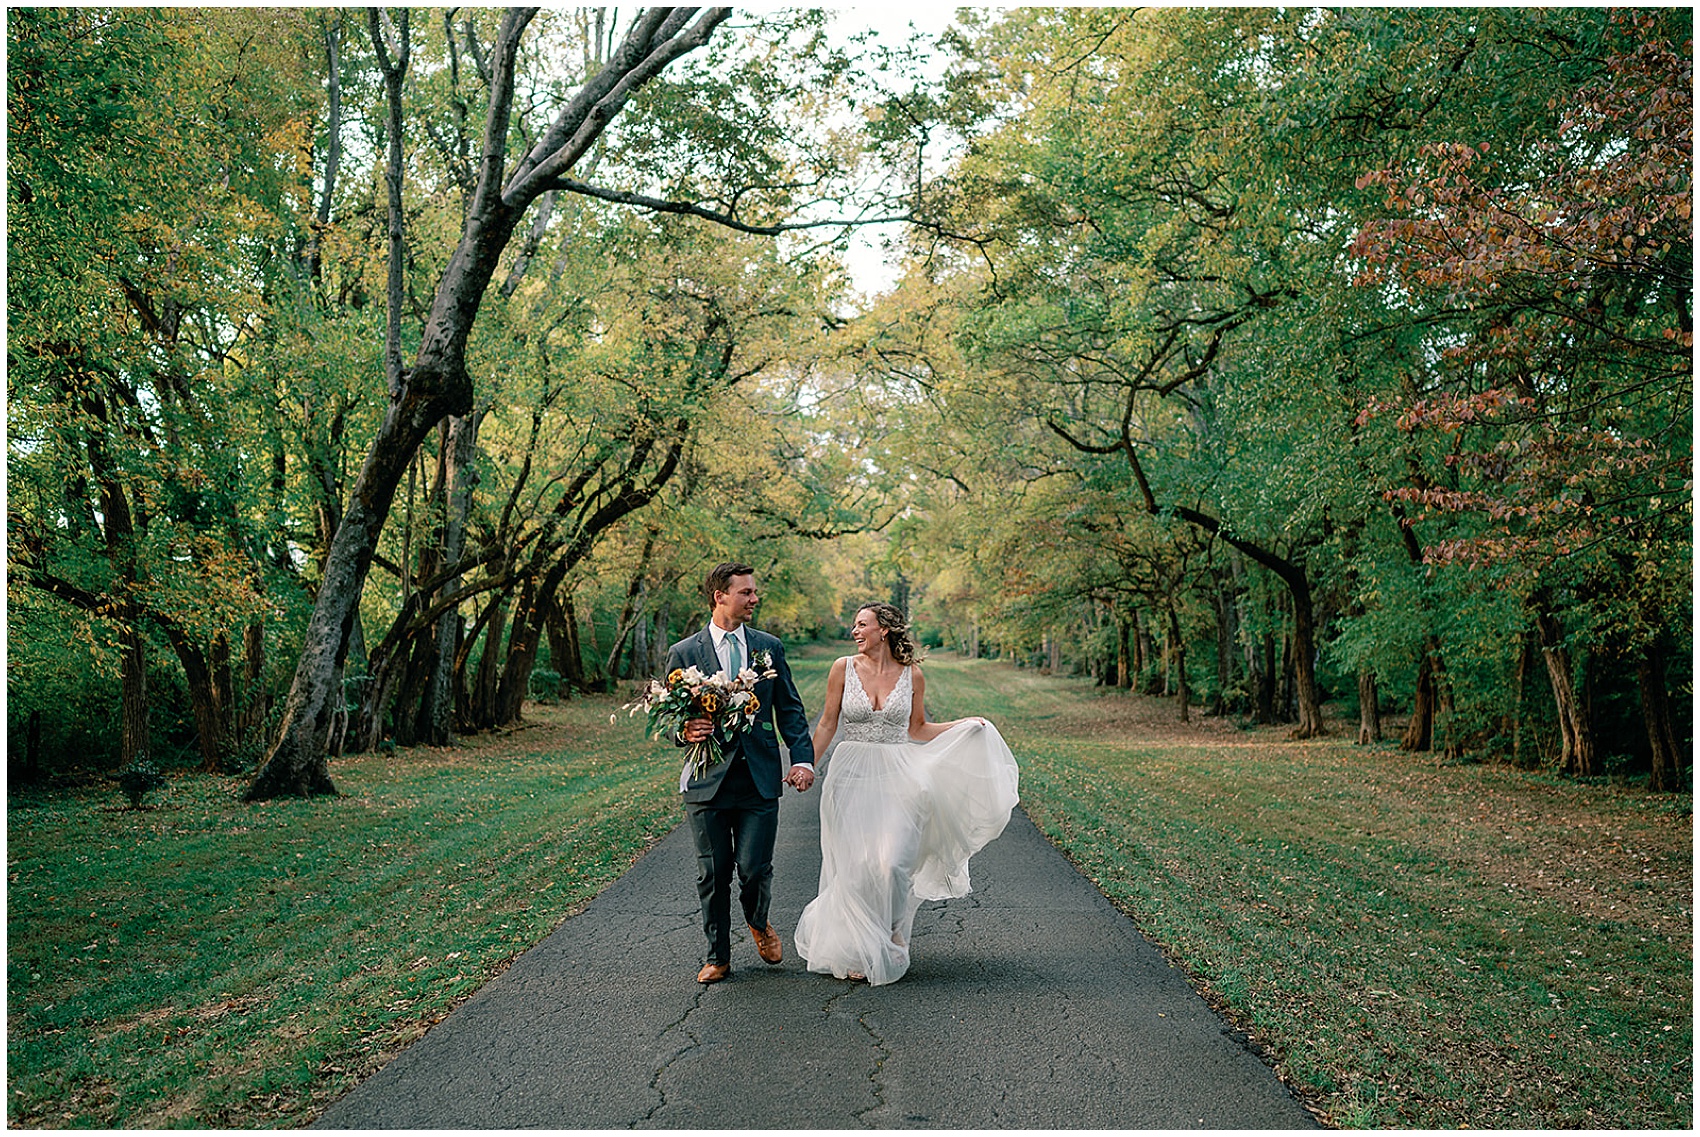 Newlyweds walk down a paved path through trees at their maple grove estate wedding